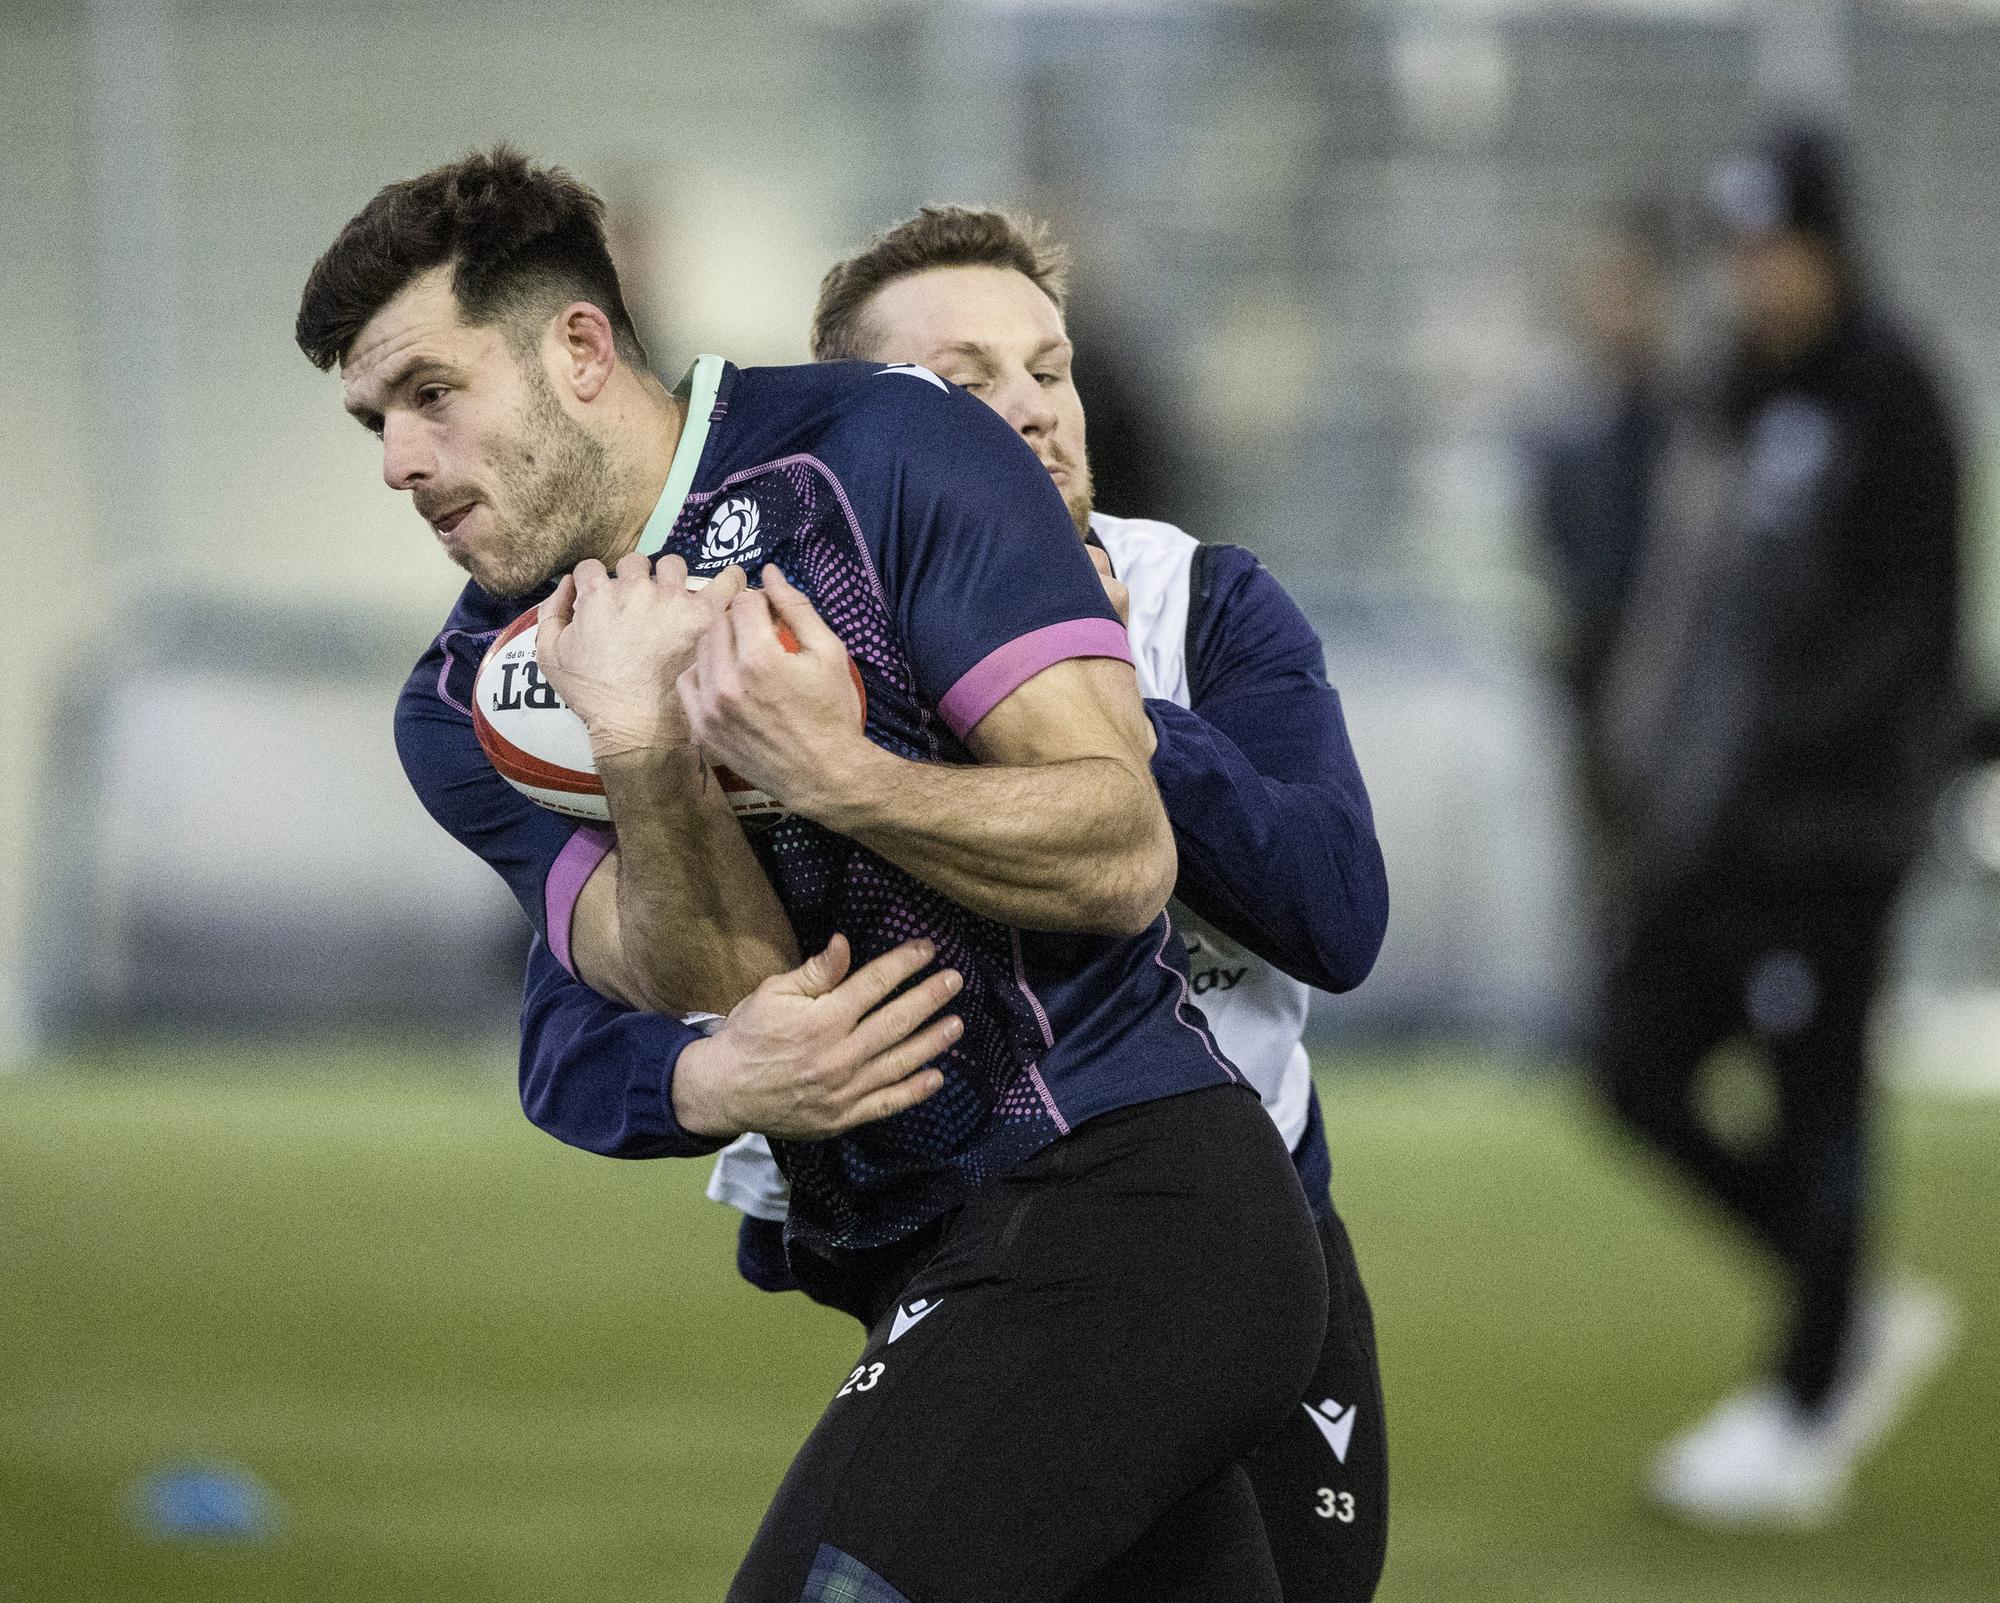 six nations: blair kinghorn returns for scotland but major darcy graham setback after calcutta cup squad update